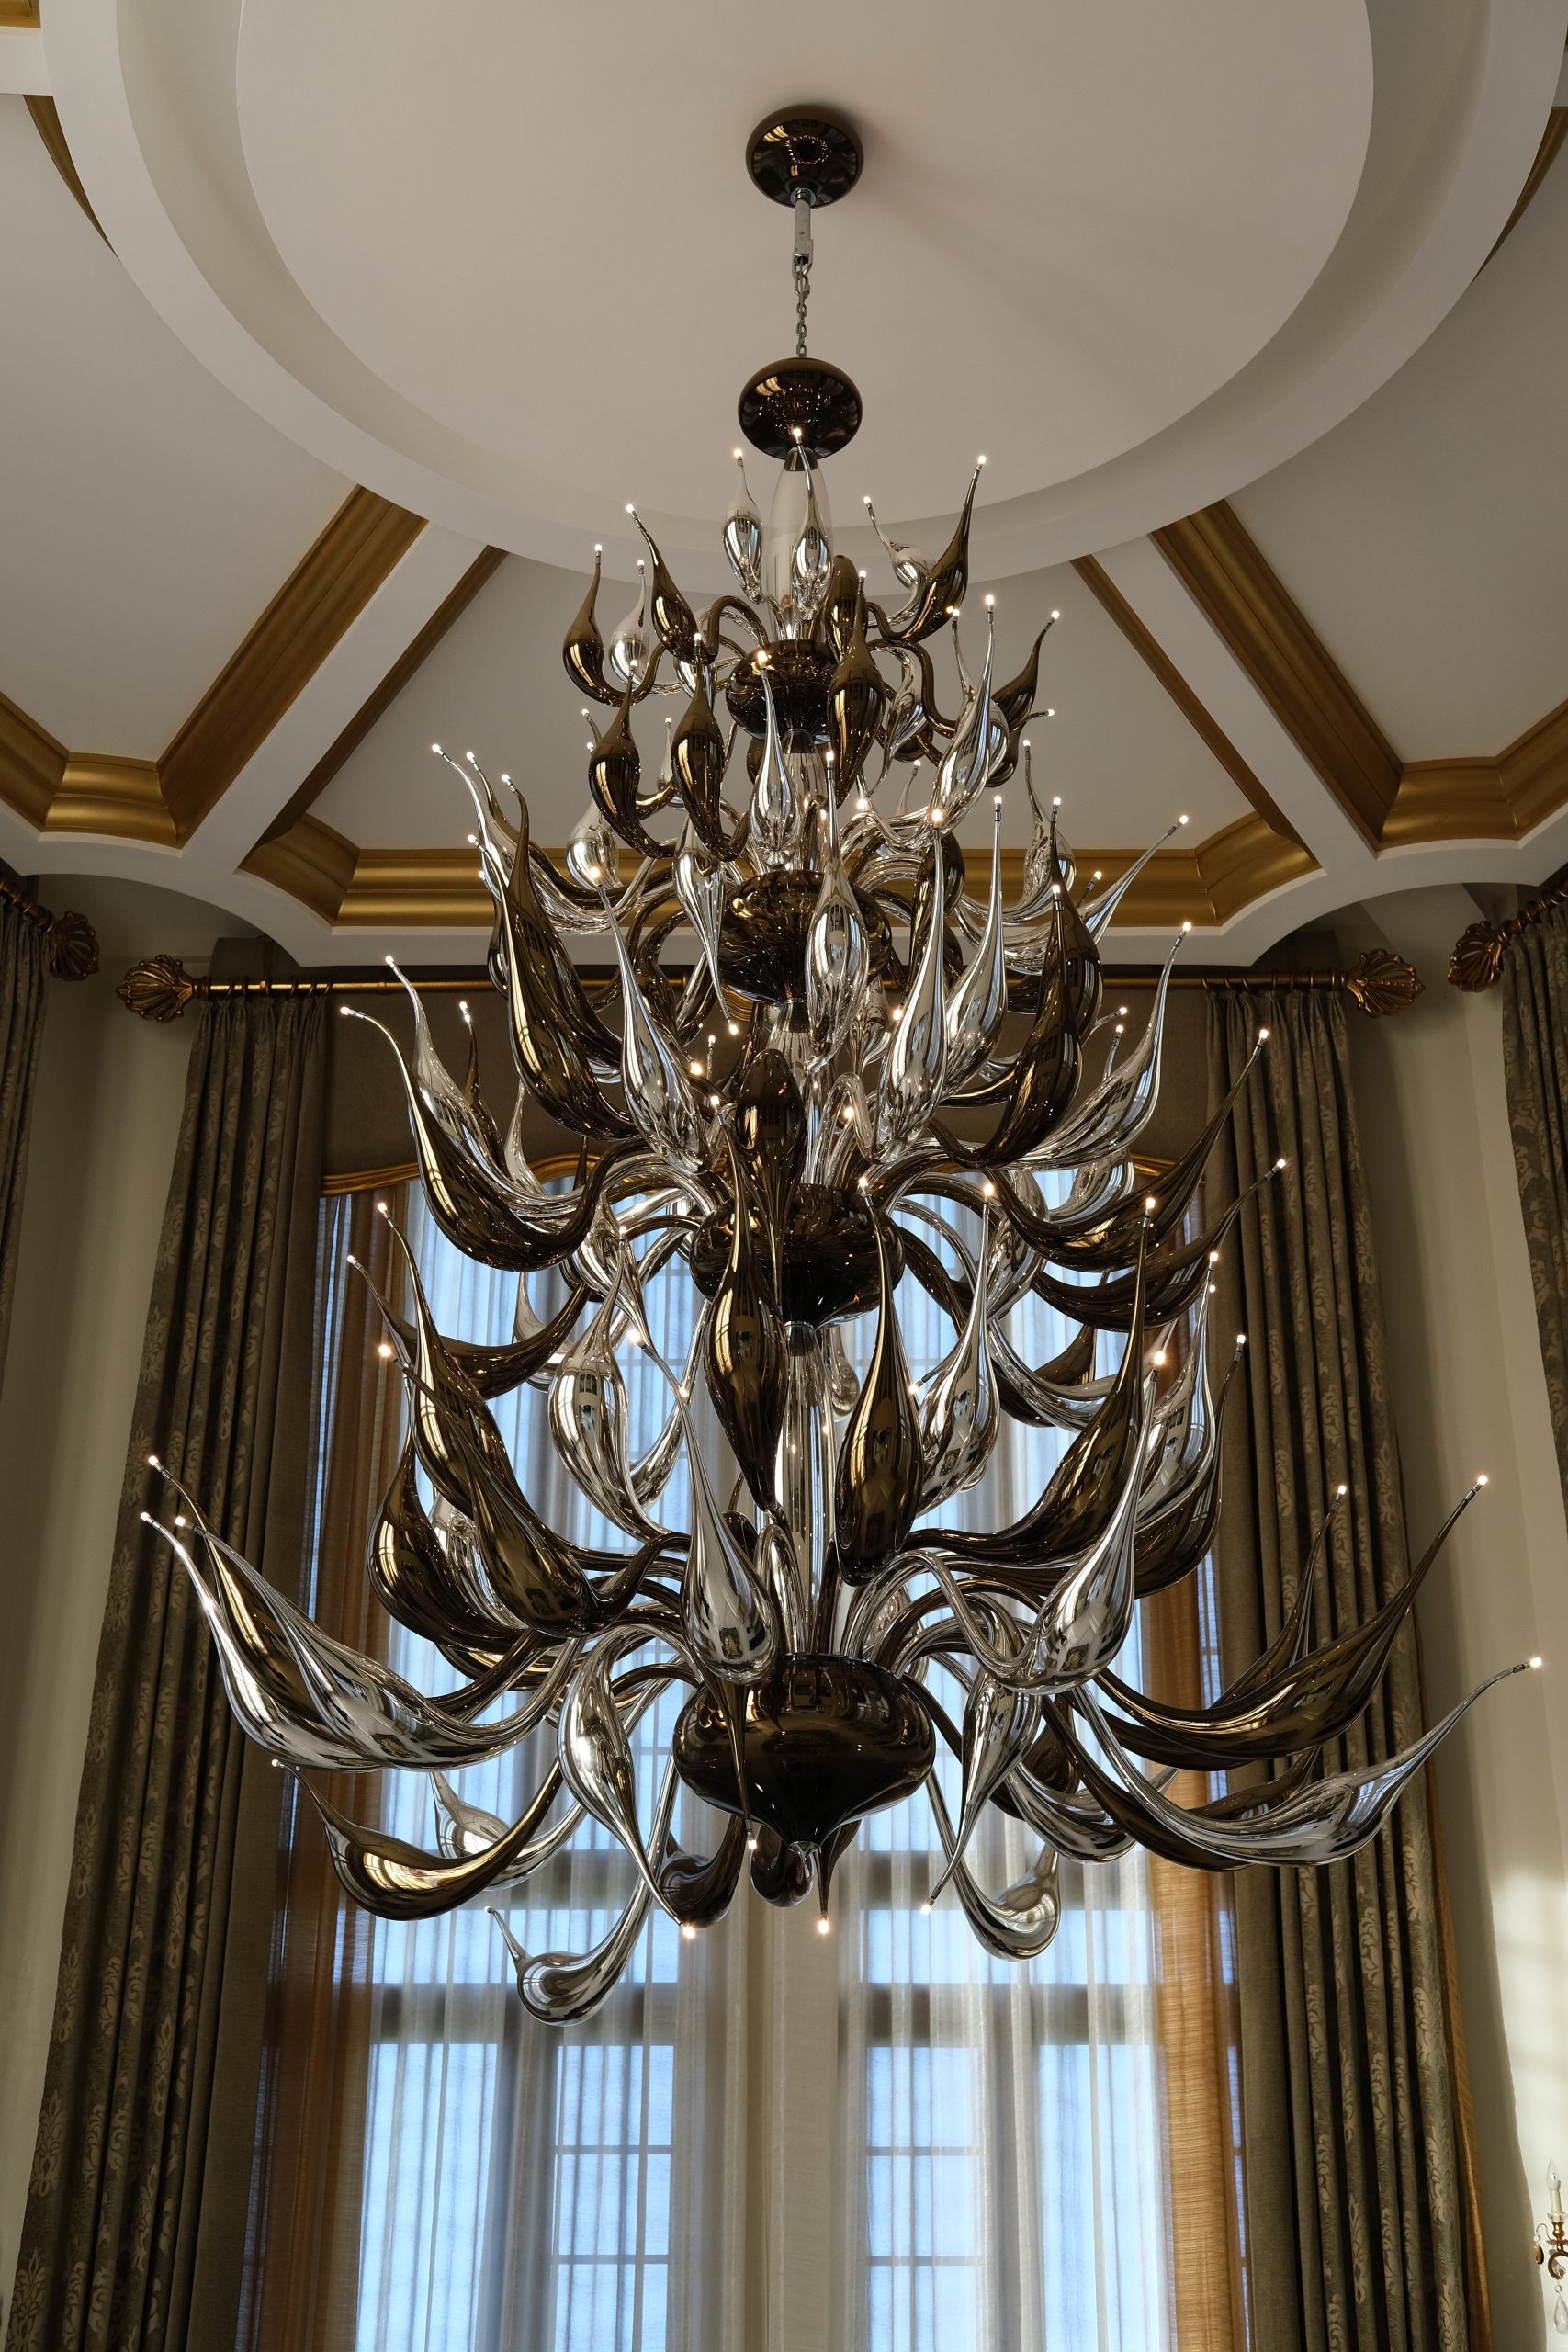 Big chandelier from ceiling